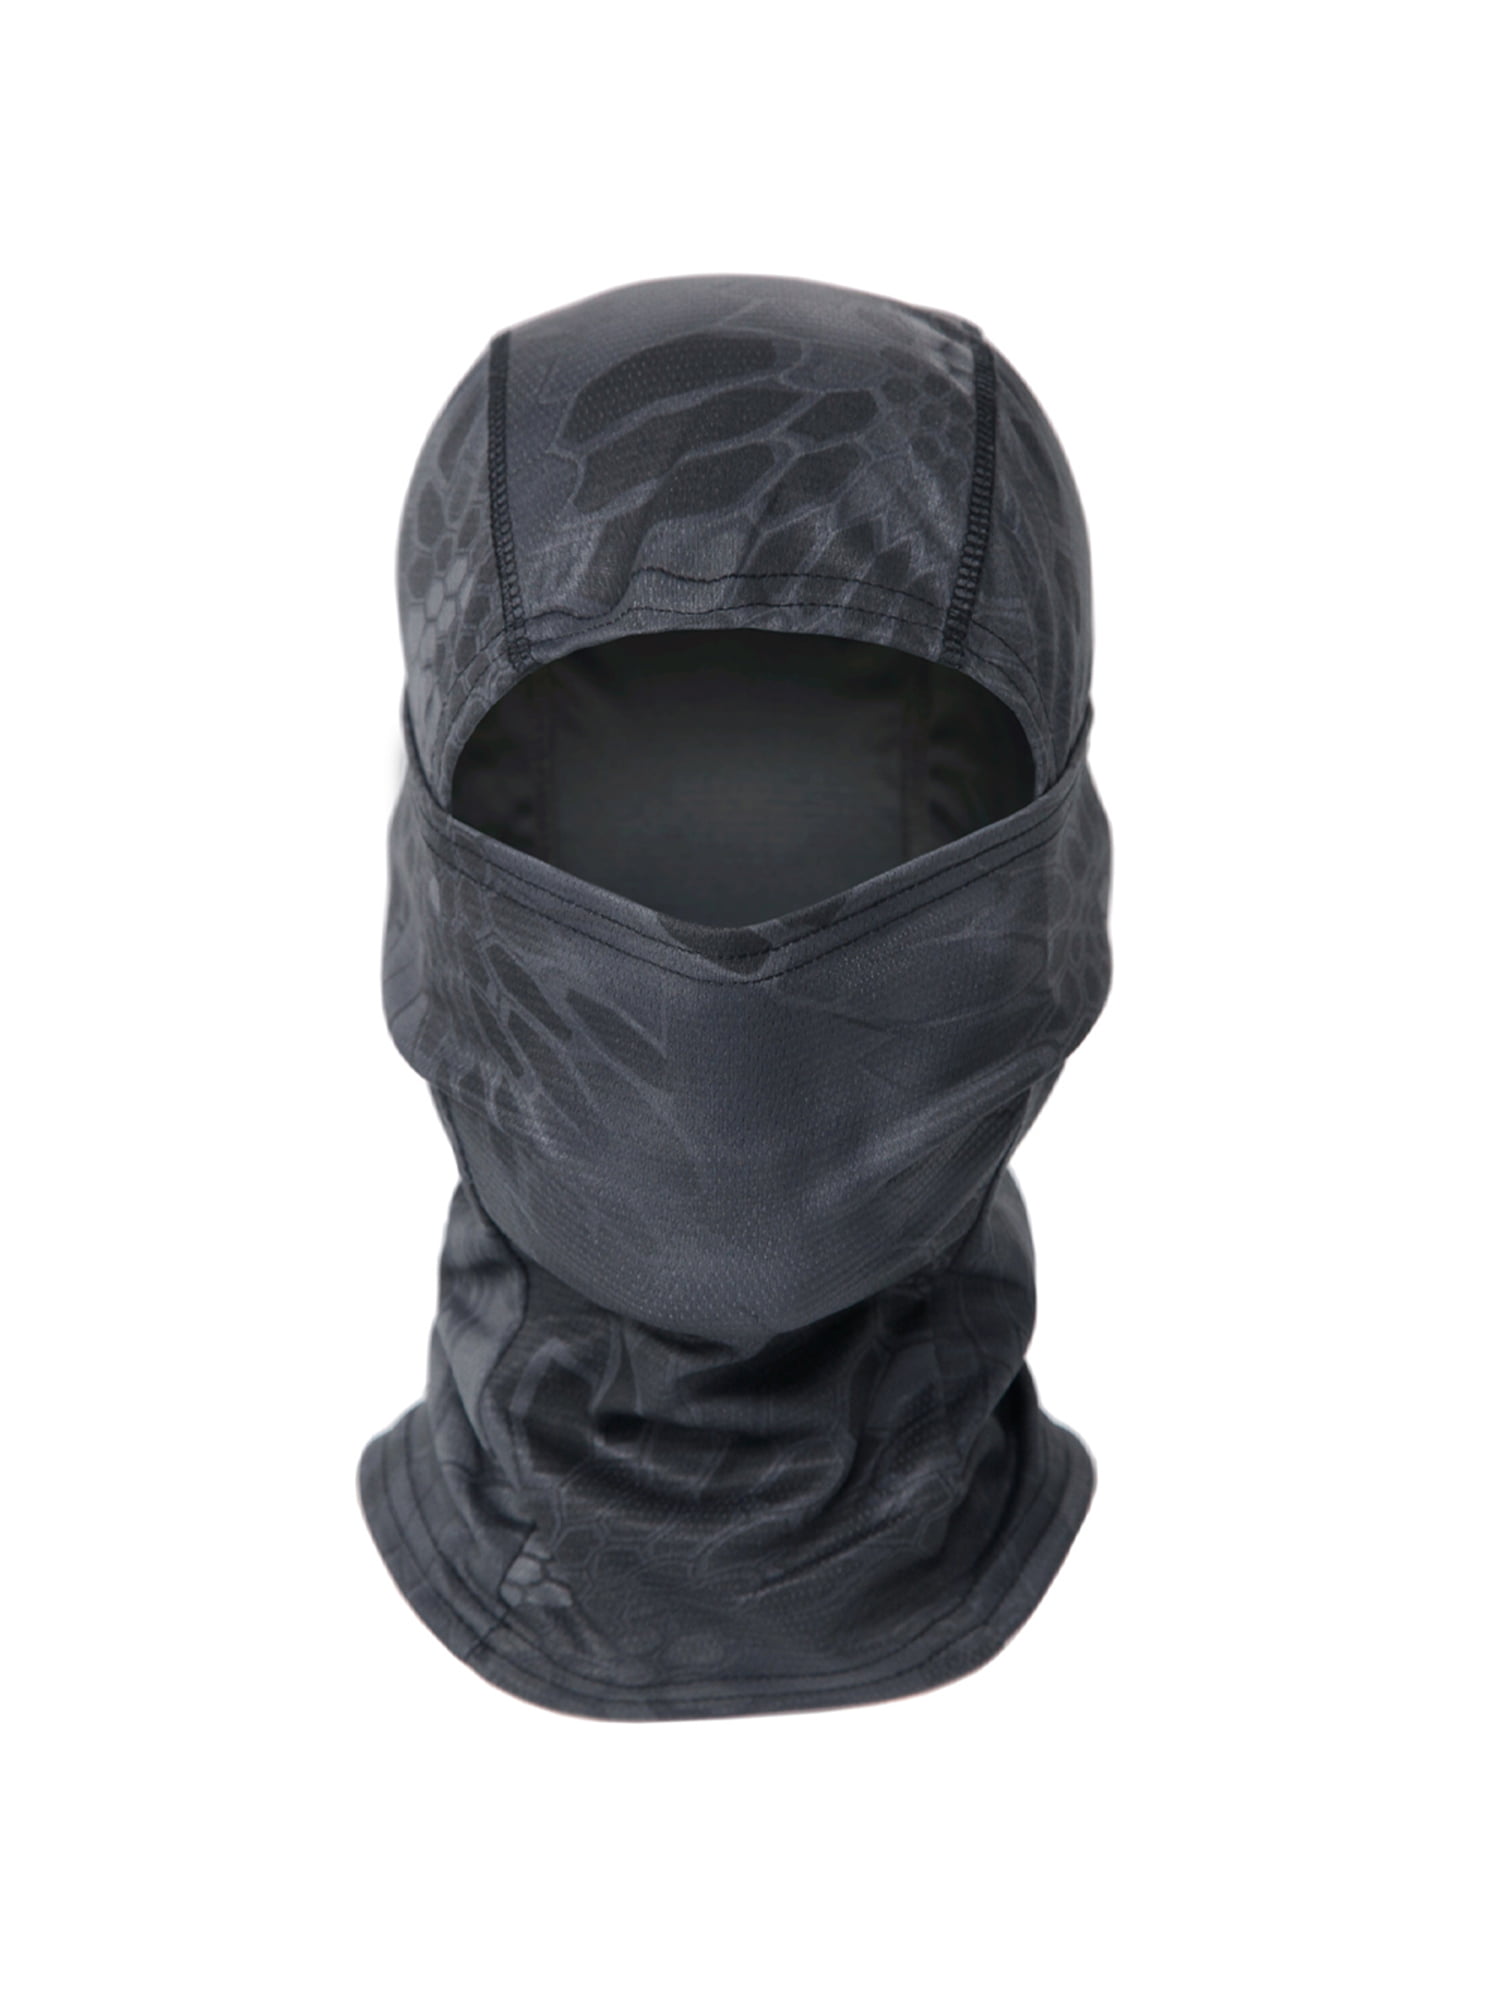 Unisex Outdoor Camouflage Style Balaclava Full Face  Cap Hood Colorful 